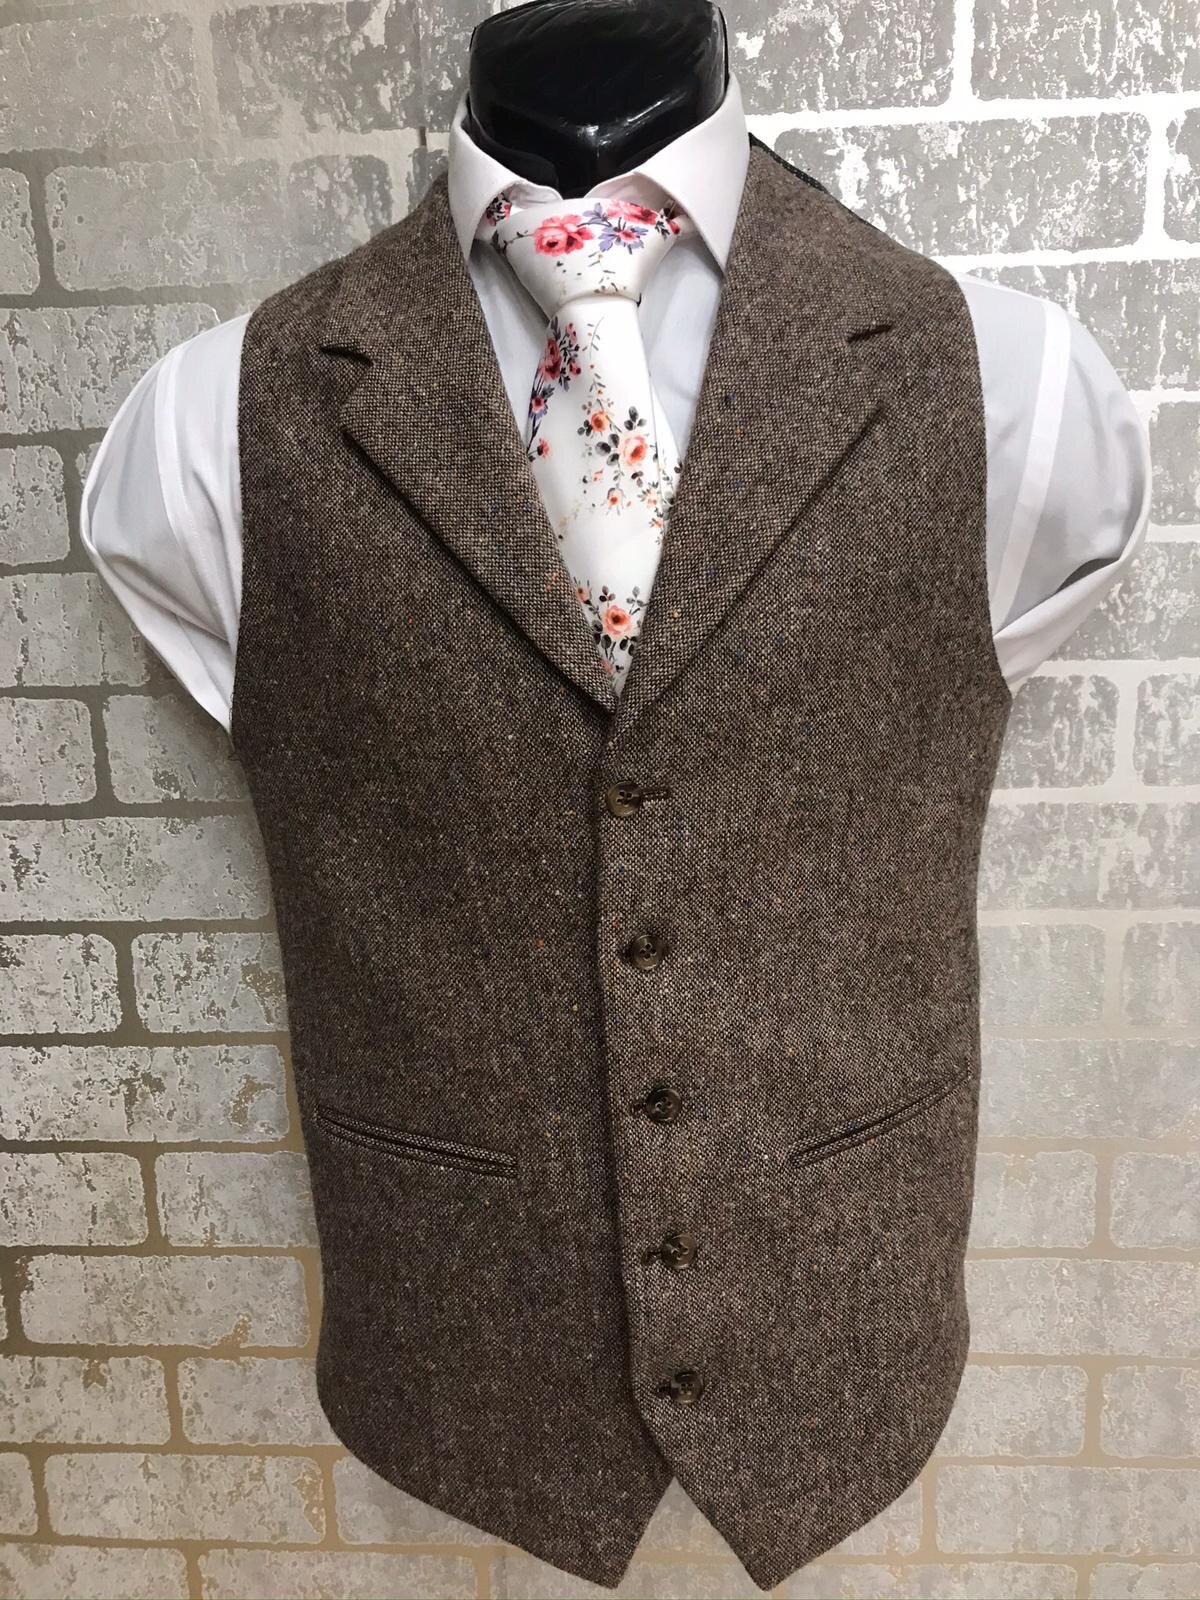 Vintage Tweed Suits To Hire For Wedding, Prom, Derby, Derbyshire — Jon ...